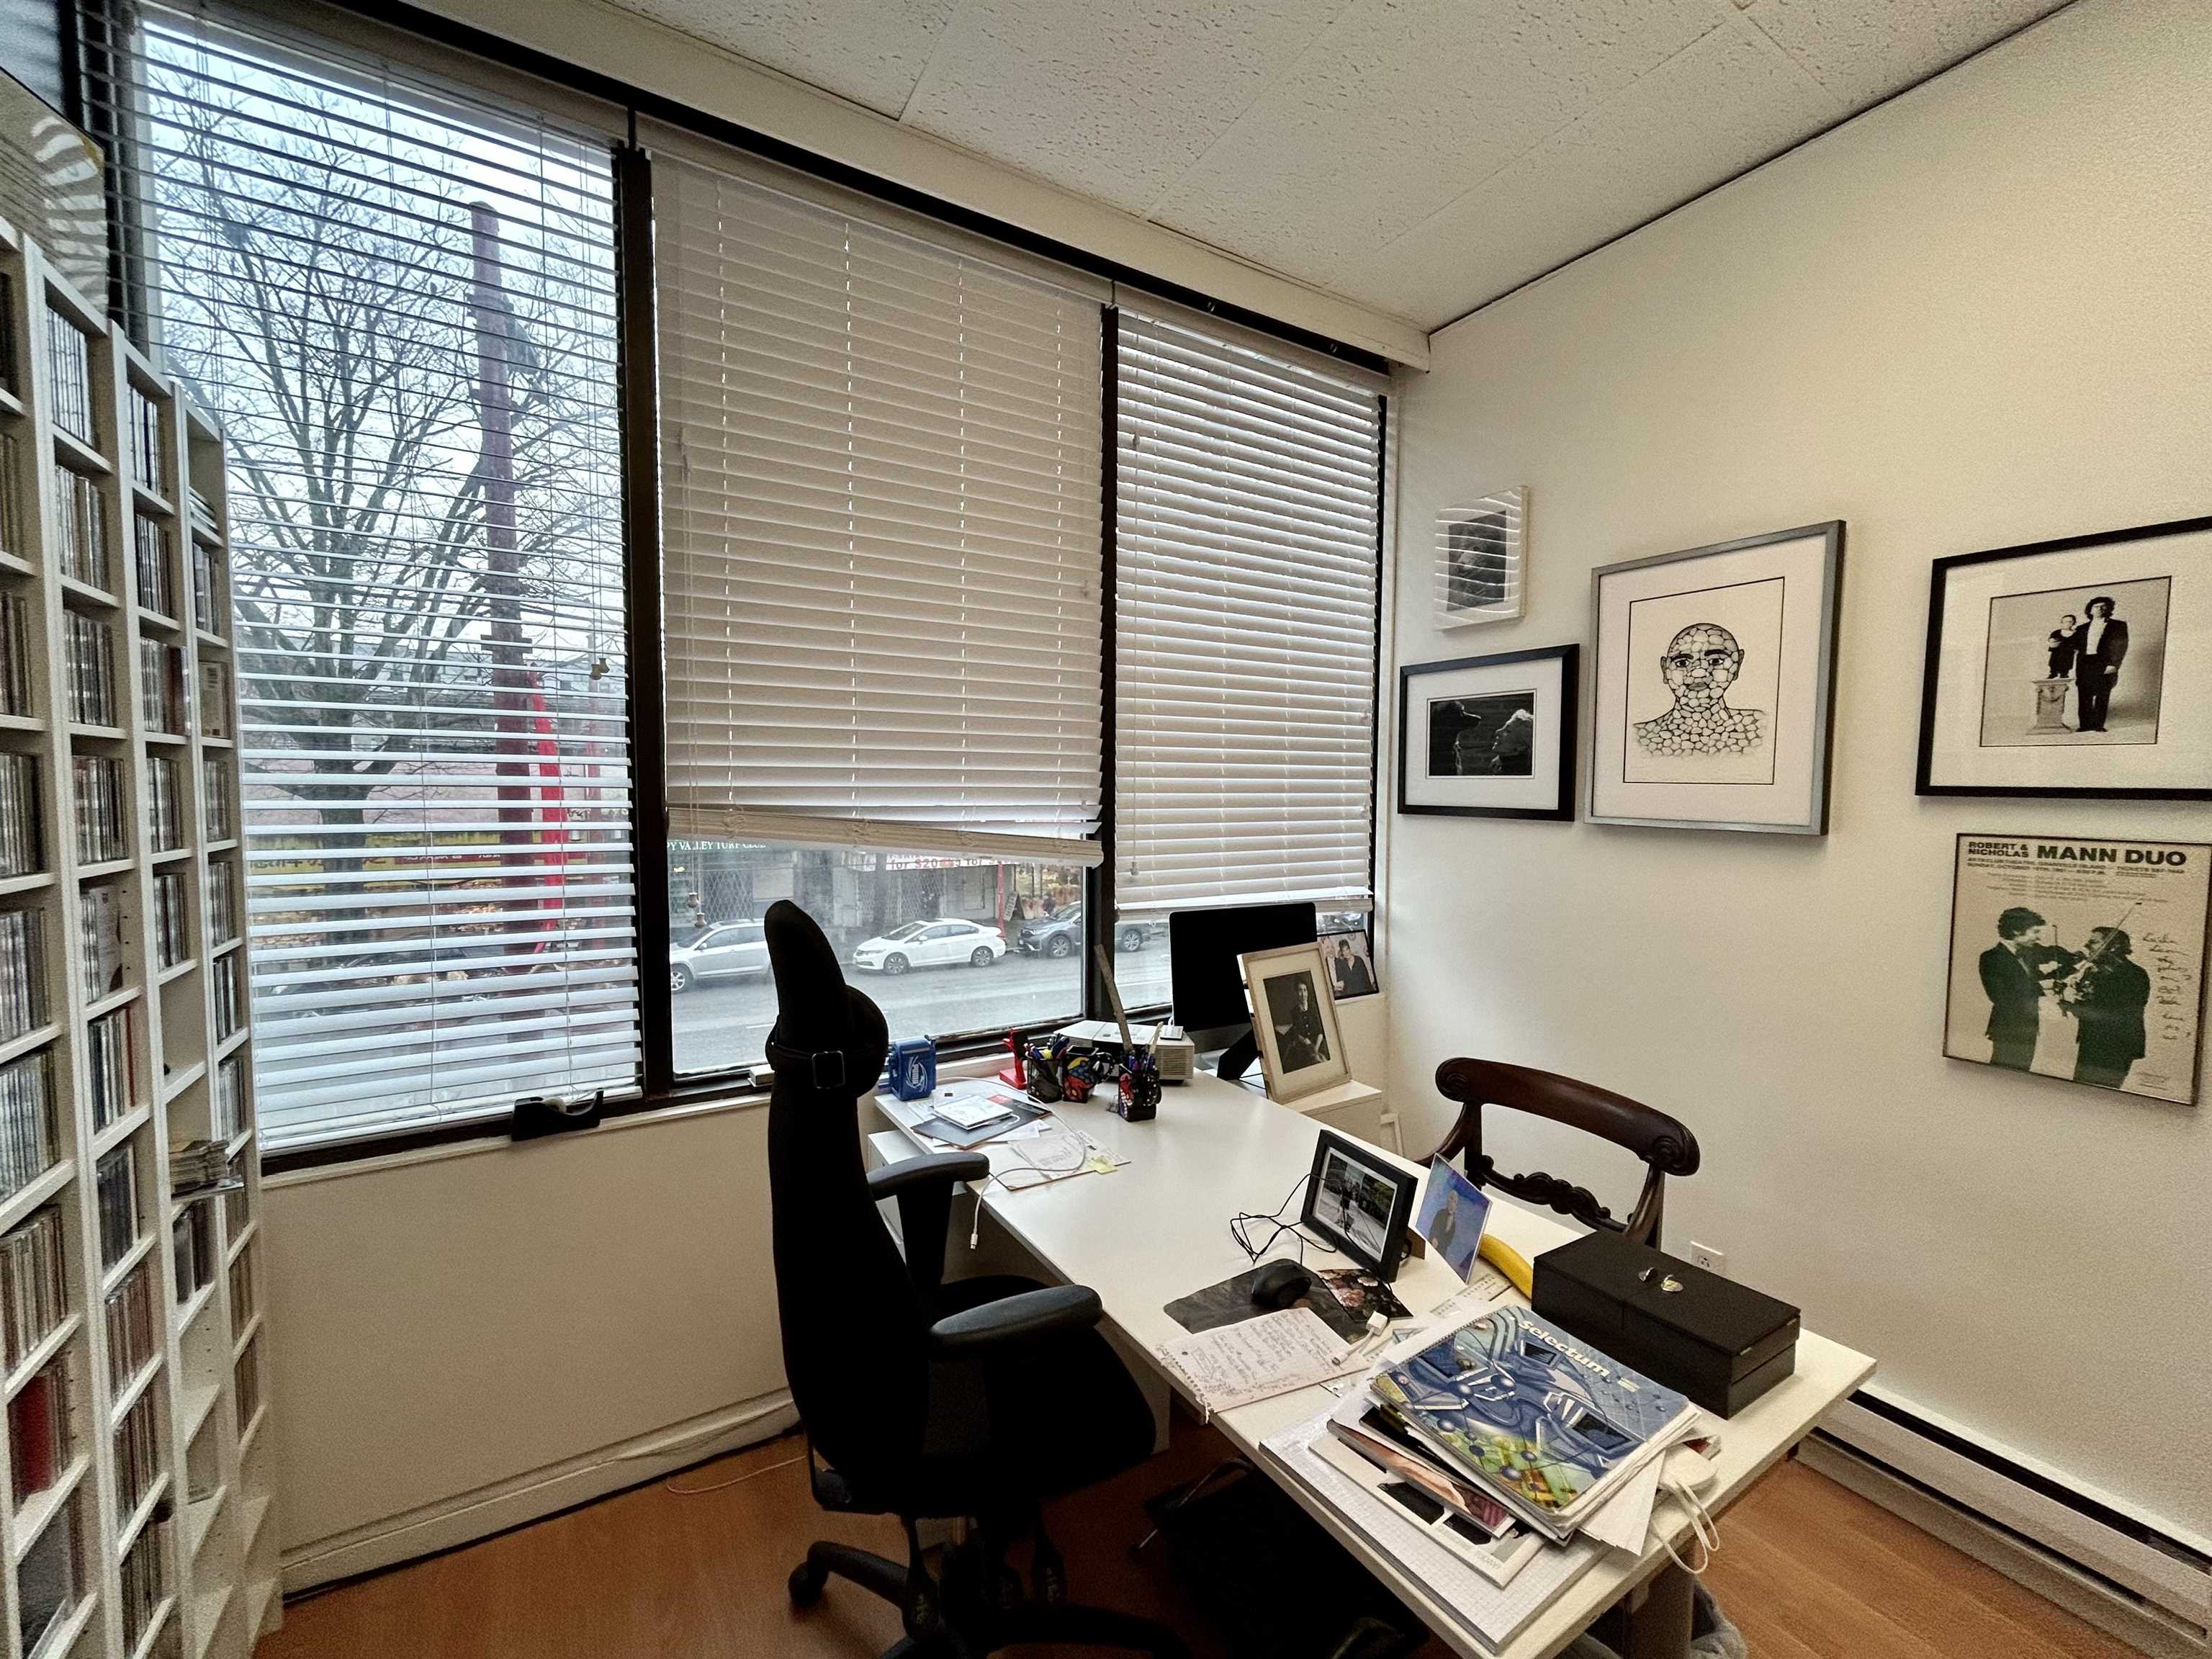 201-515 MAIN STREET, Vancouver, British Columbia, ,Office,For Lease,C8049503